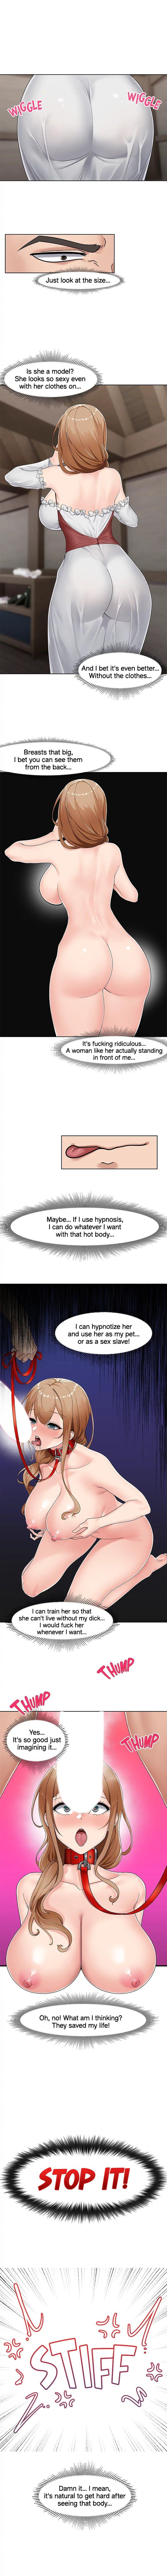 Absolute Hypnosis in Another World 17